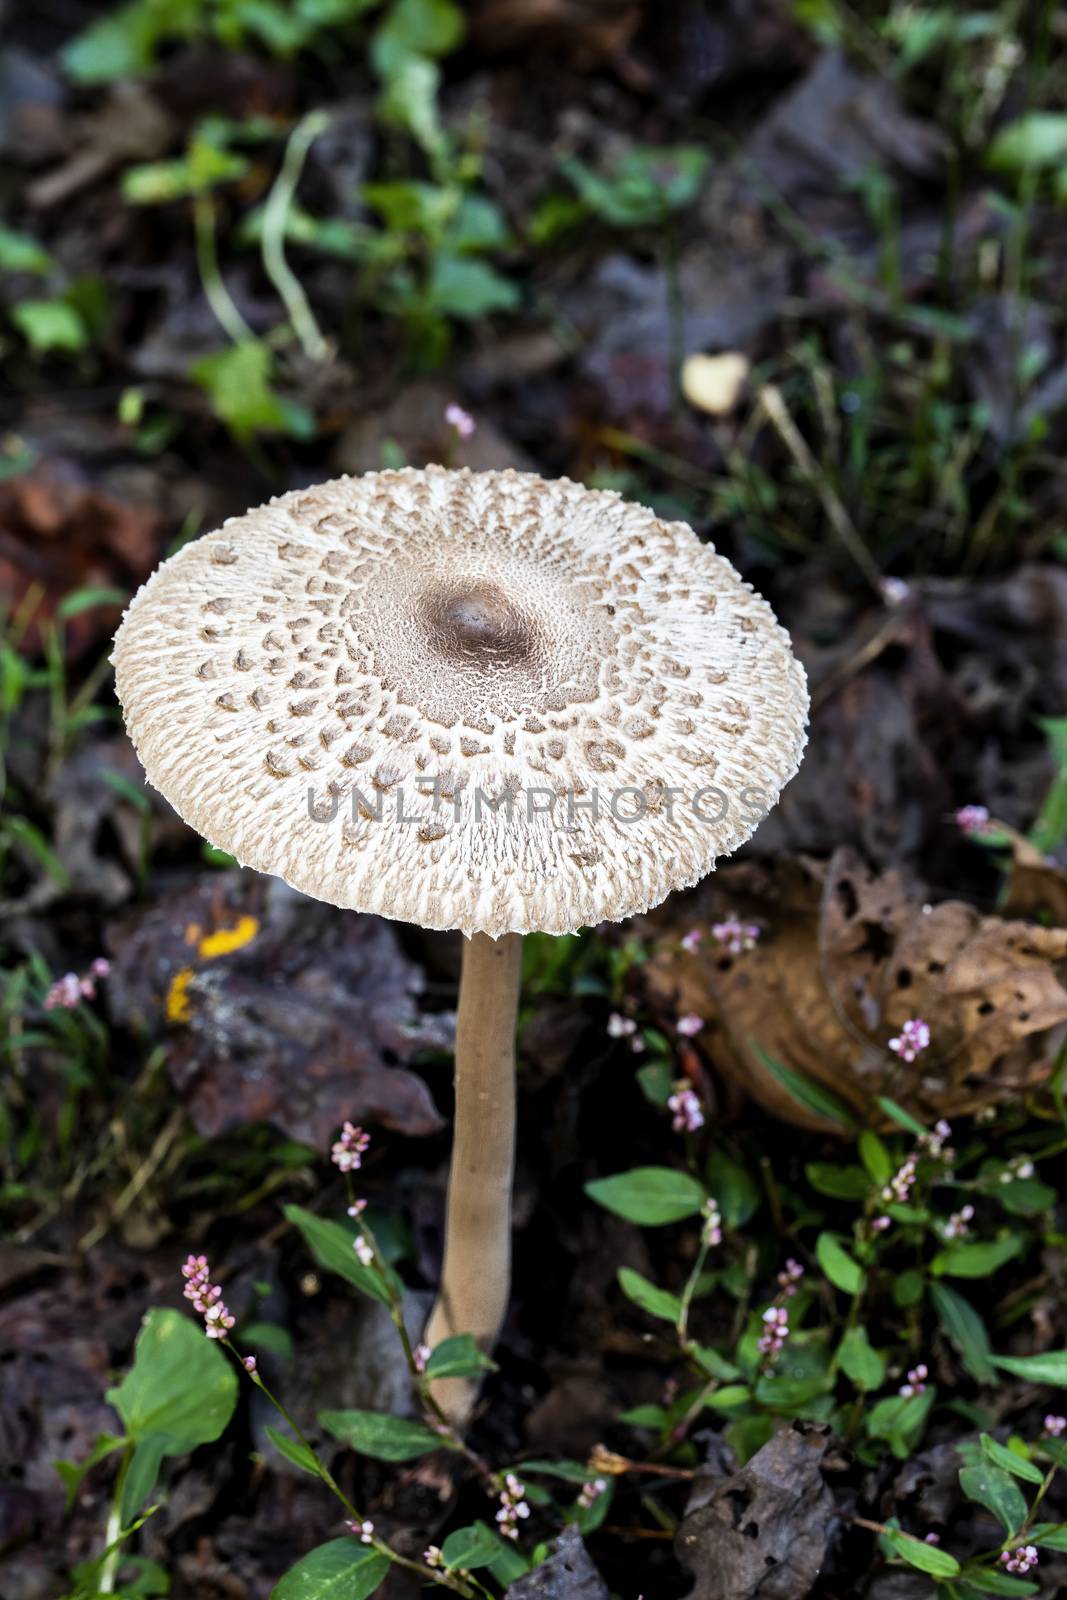 Shaggy parasol mushroom grows from the forest floor.